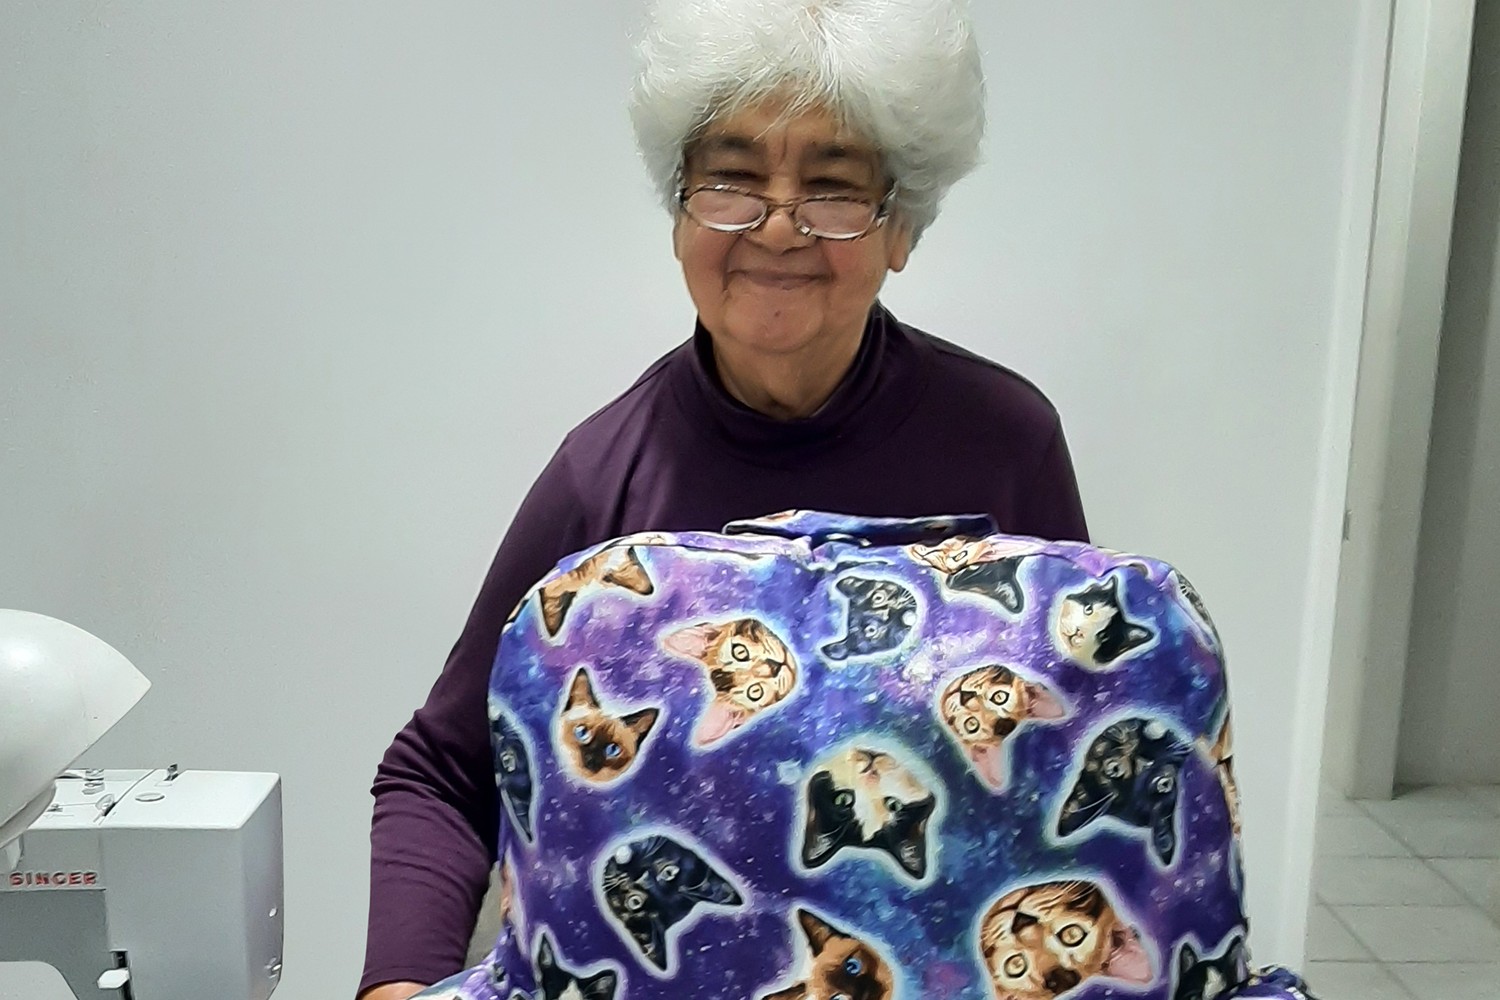 Customer Rosanna smiling next to sewing machine and a purple pillow with patterned cat faces